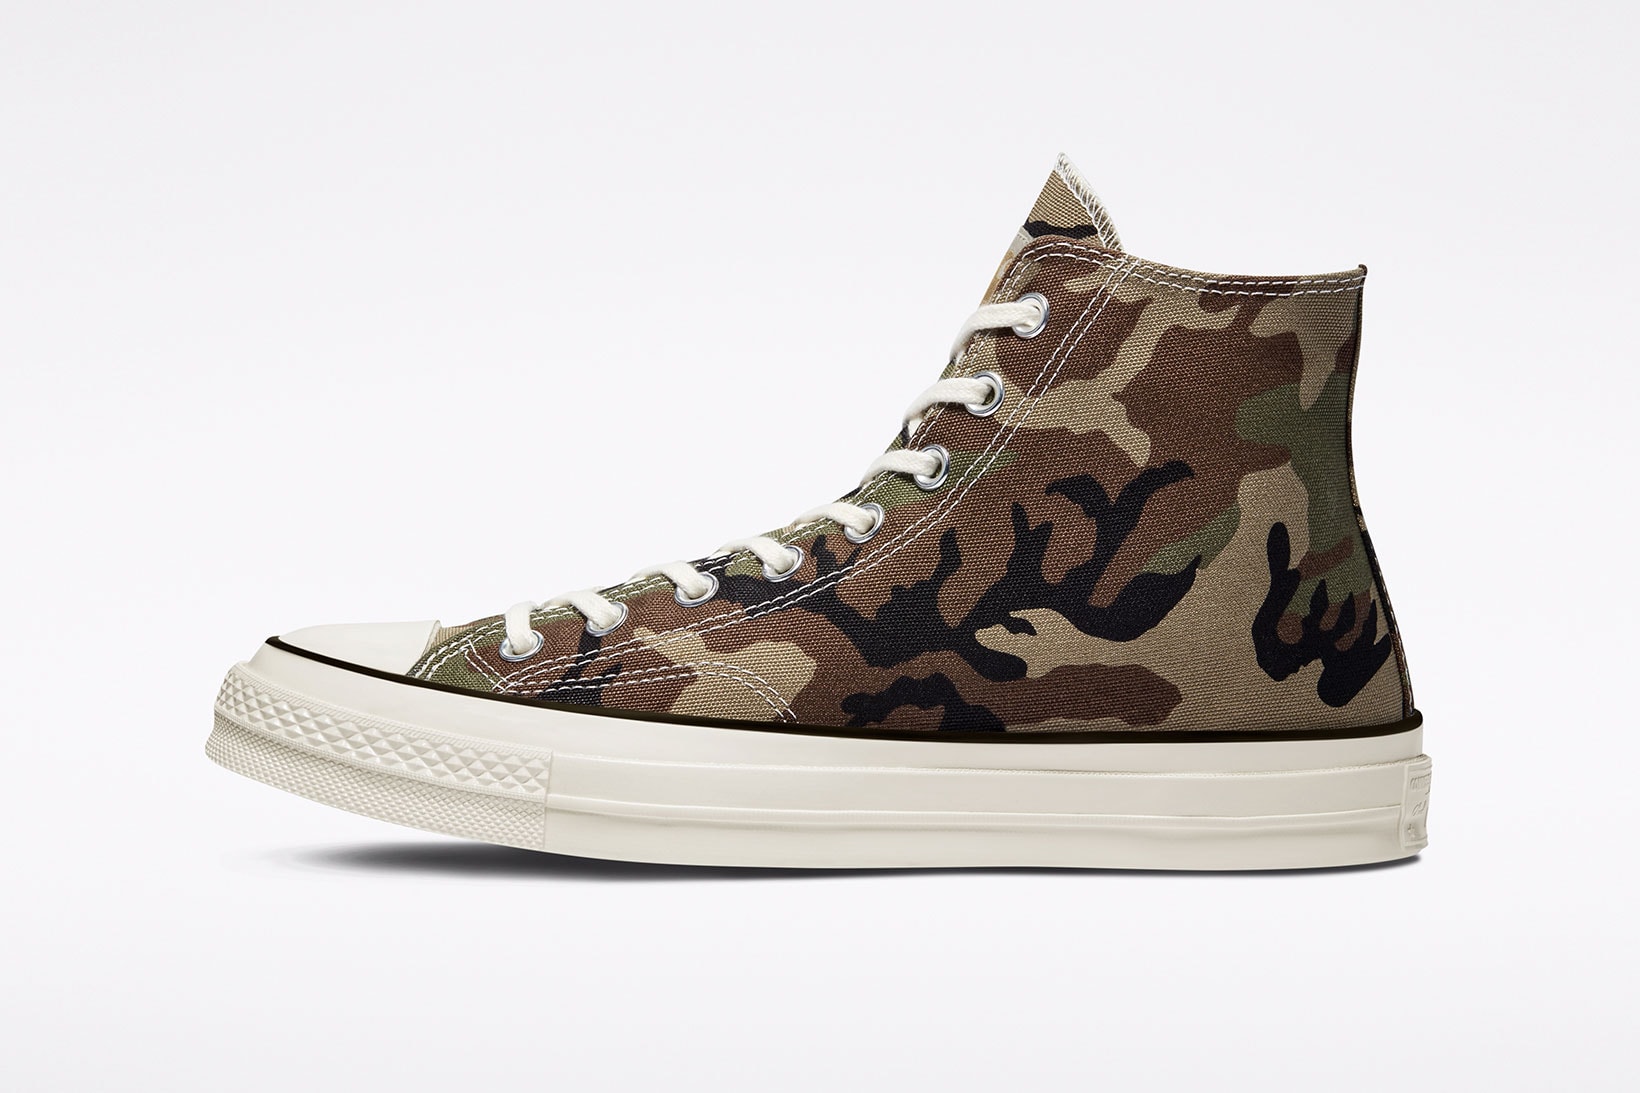 carhartt wip converse chuck 70 icons collaboration sneakers camouflage medial side details